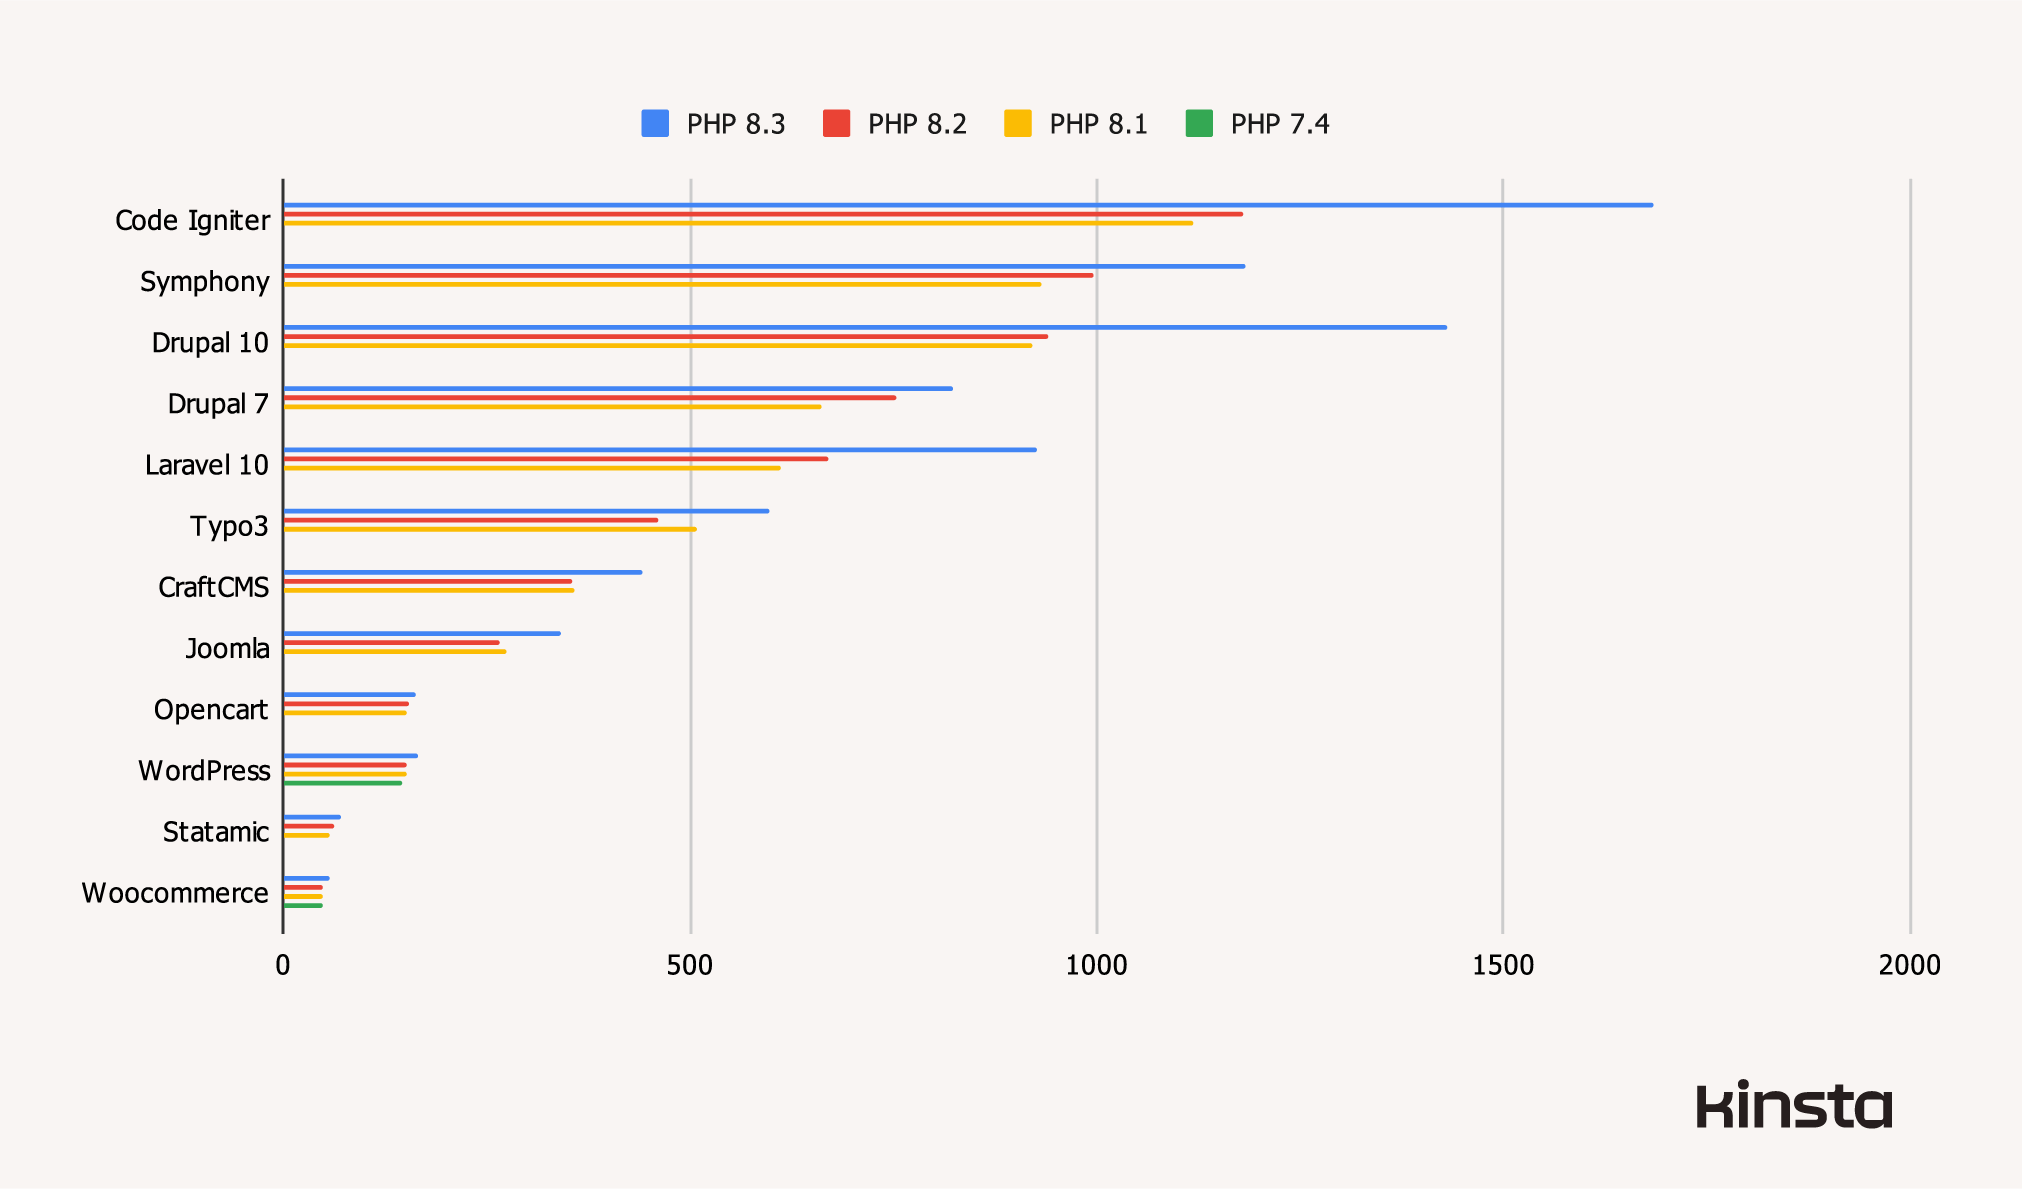 Performance of all tested CMSs and frameworks on PHP 7.4, 8.1, 8.2, and 8.3 (in requests/second).